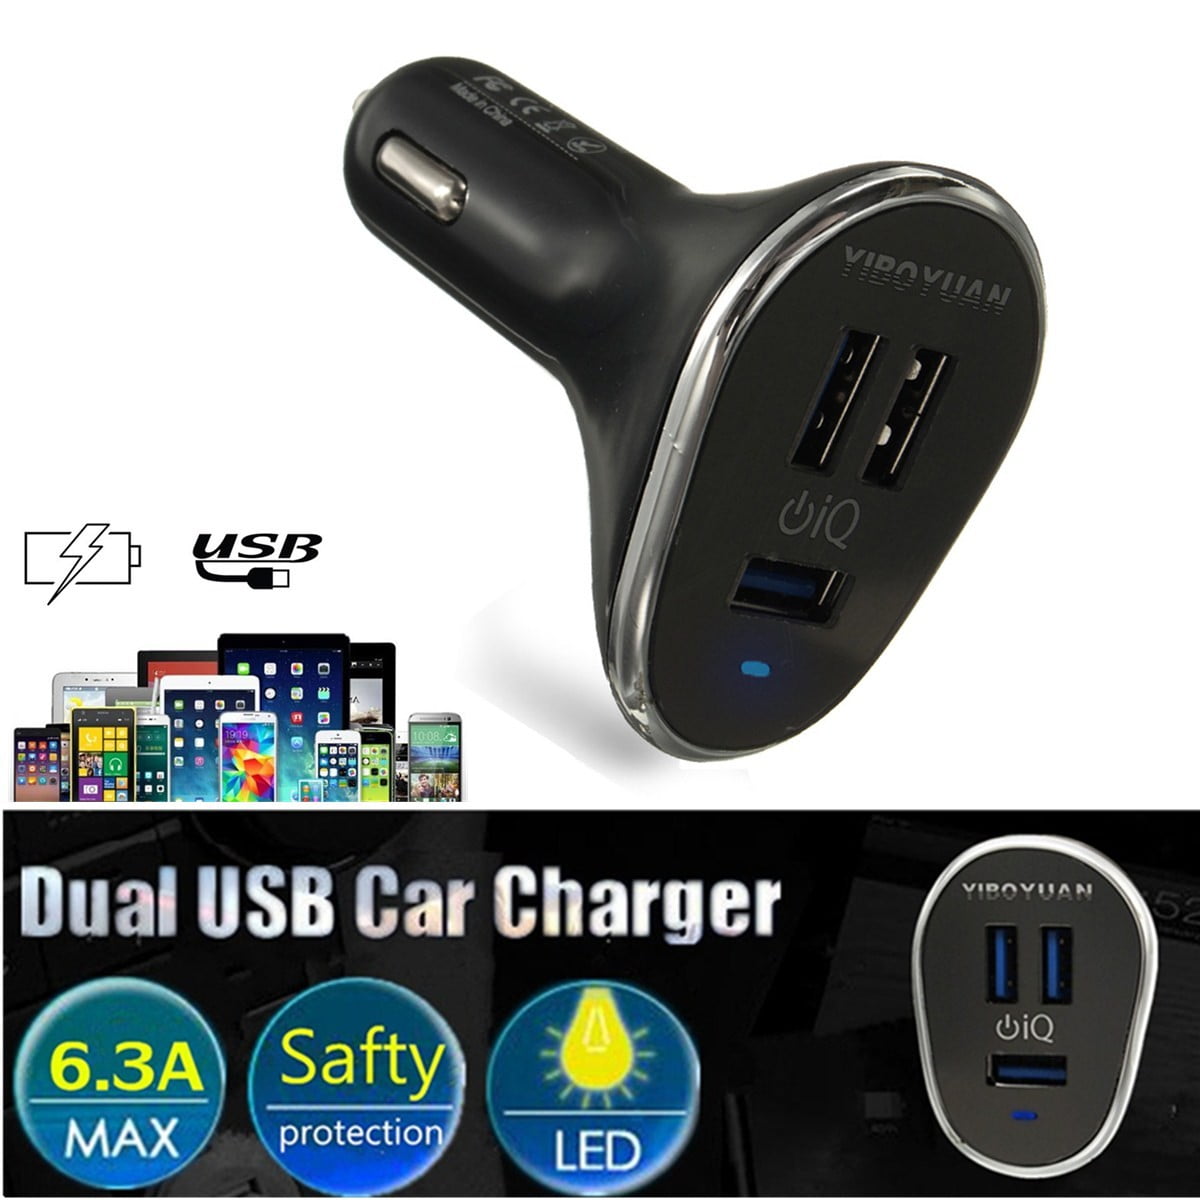 3Port USB Car Charger LED Display For iPhone 6 6s Samsung Galaxy S6 Note 5 4 HTC ...